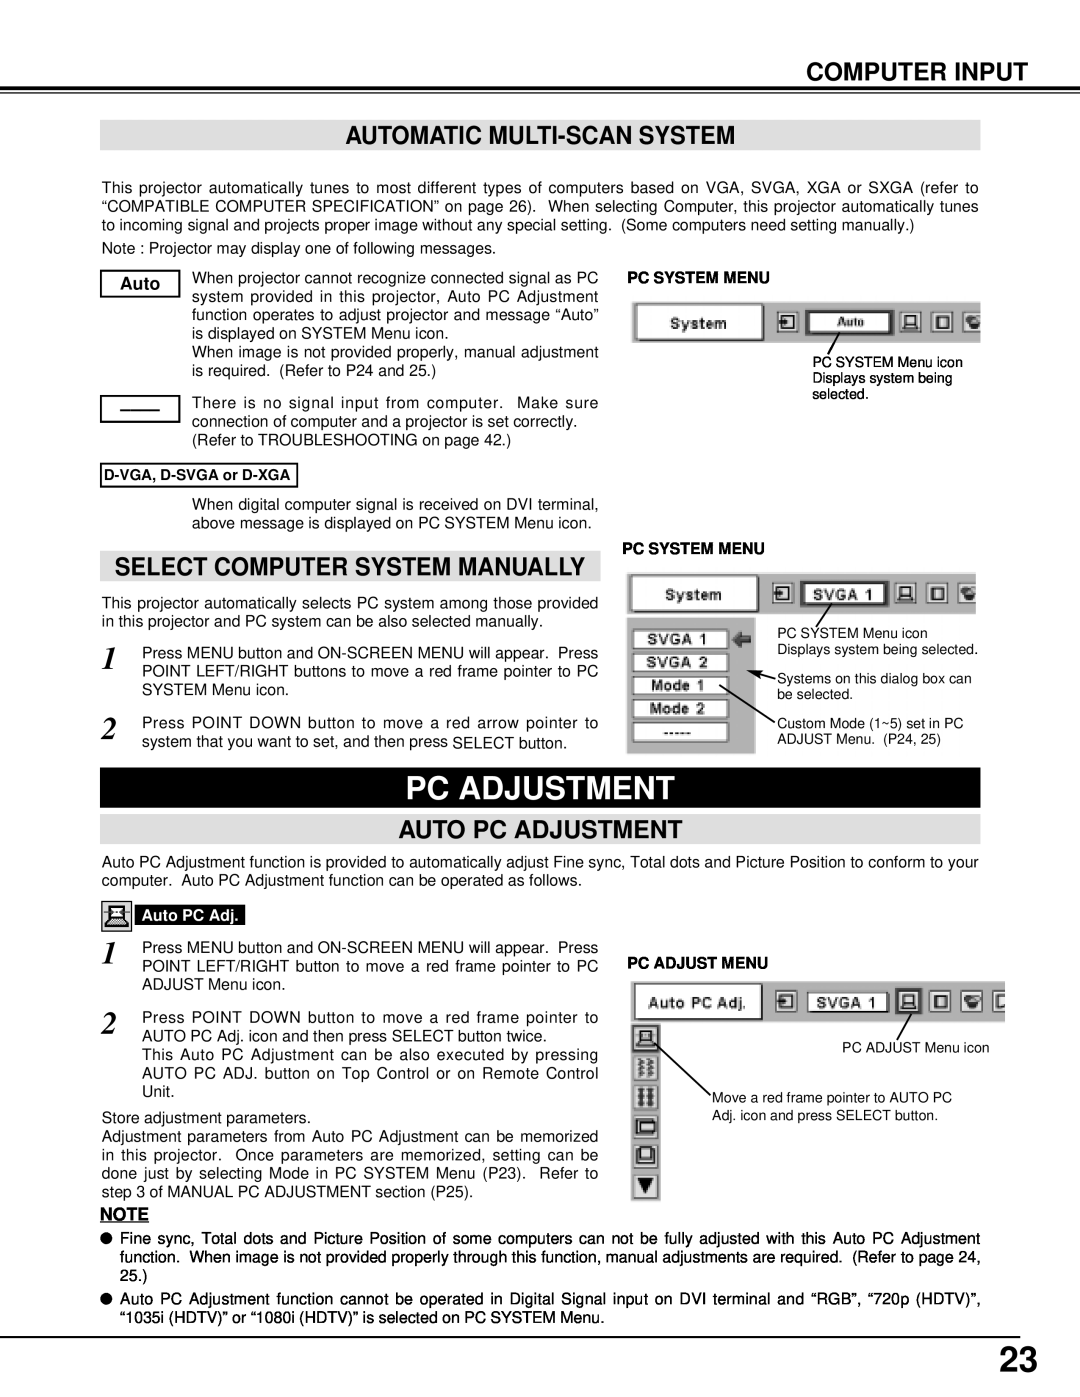 Sanyo PLV-70 Computer Input Automatic Multi-Scan System, Auto Pc Adjustment, Select Computer System Manually 